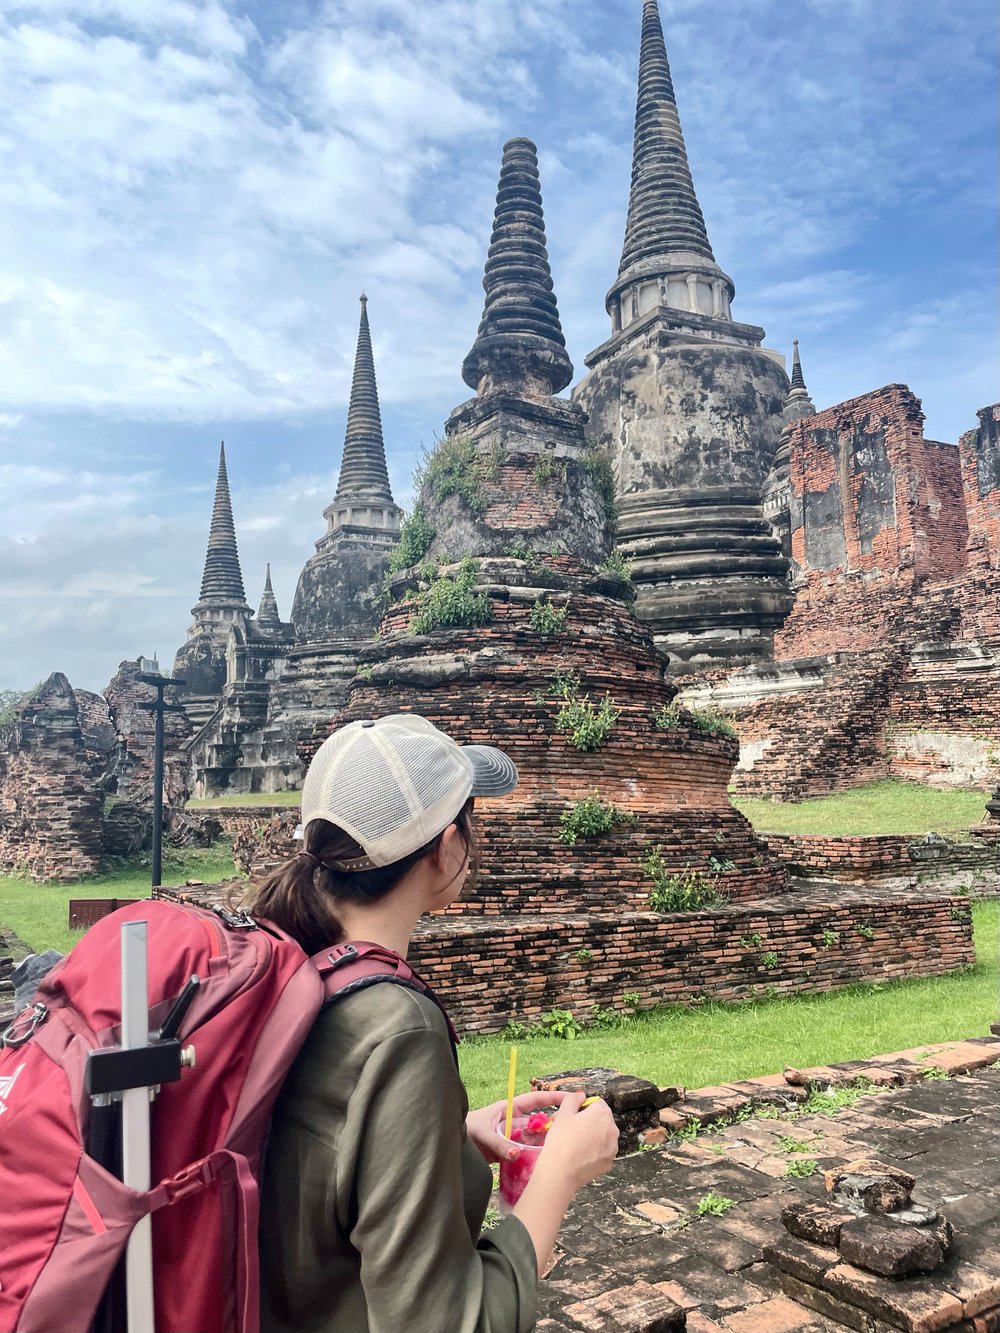 Quick tour of the main temples. Pictured: Wat Phra Si Sanphet